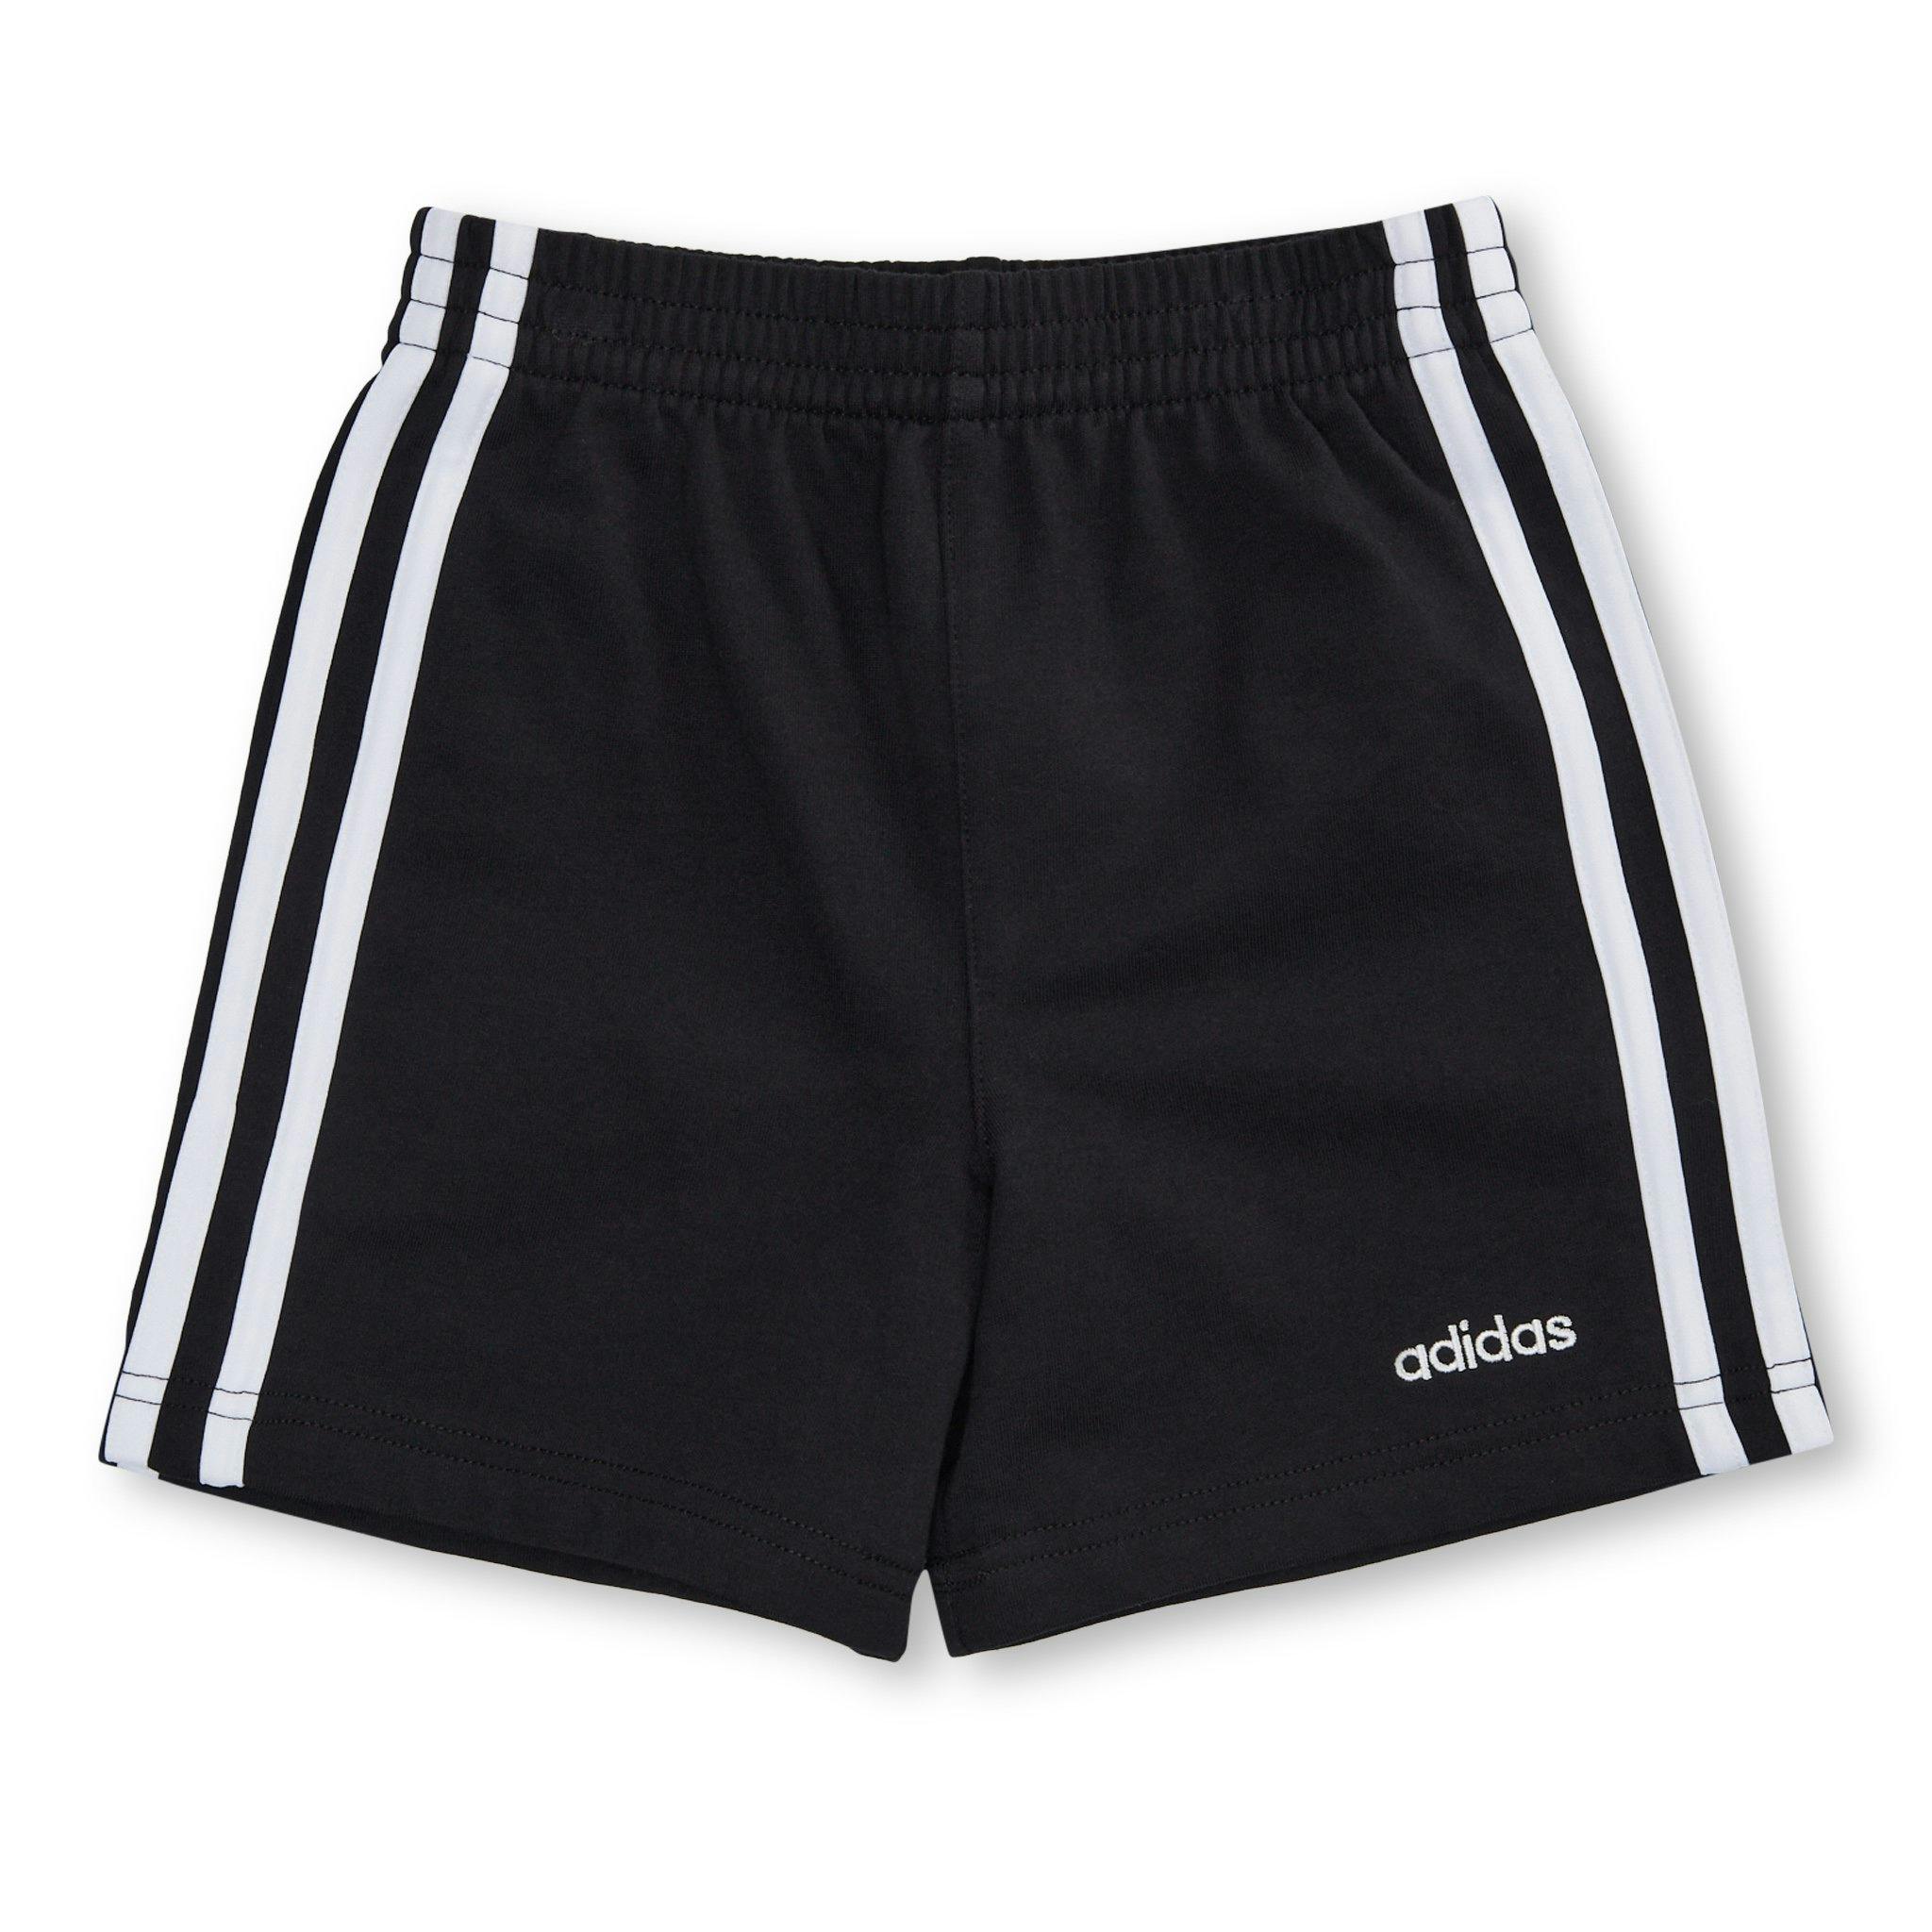 Product image for Core Ft 3S Short - Boys